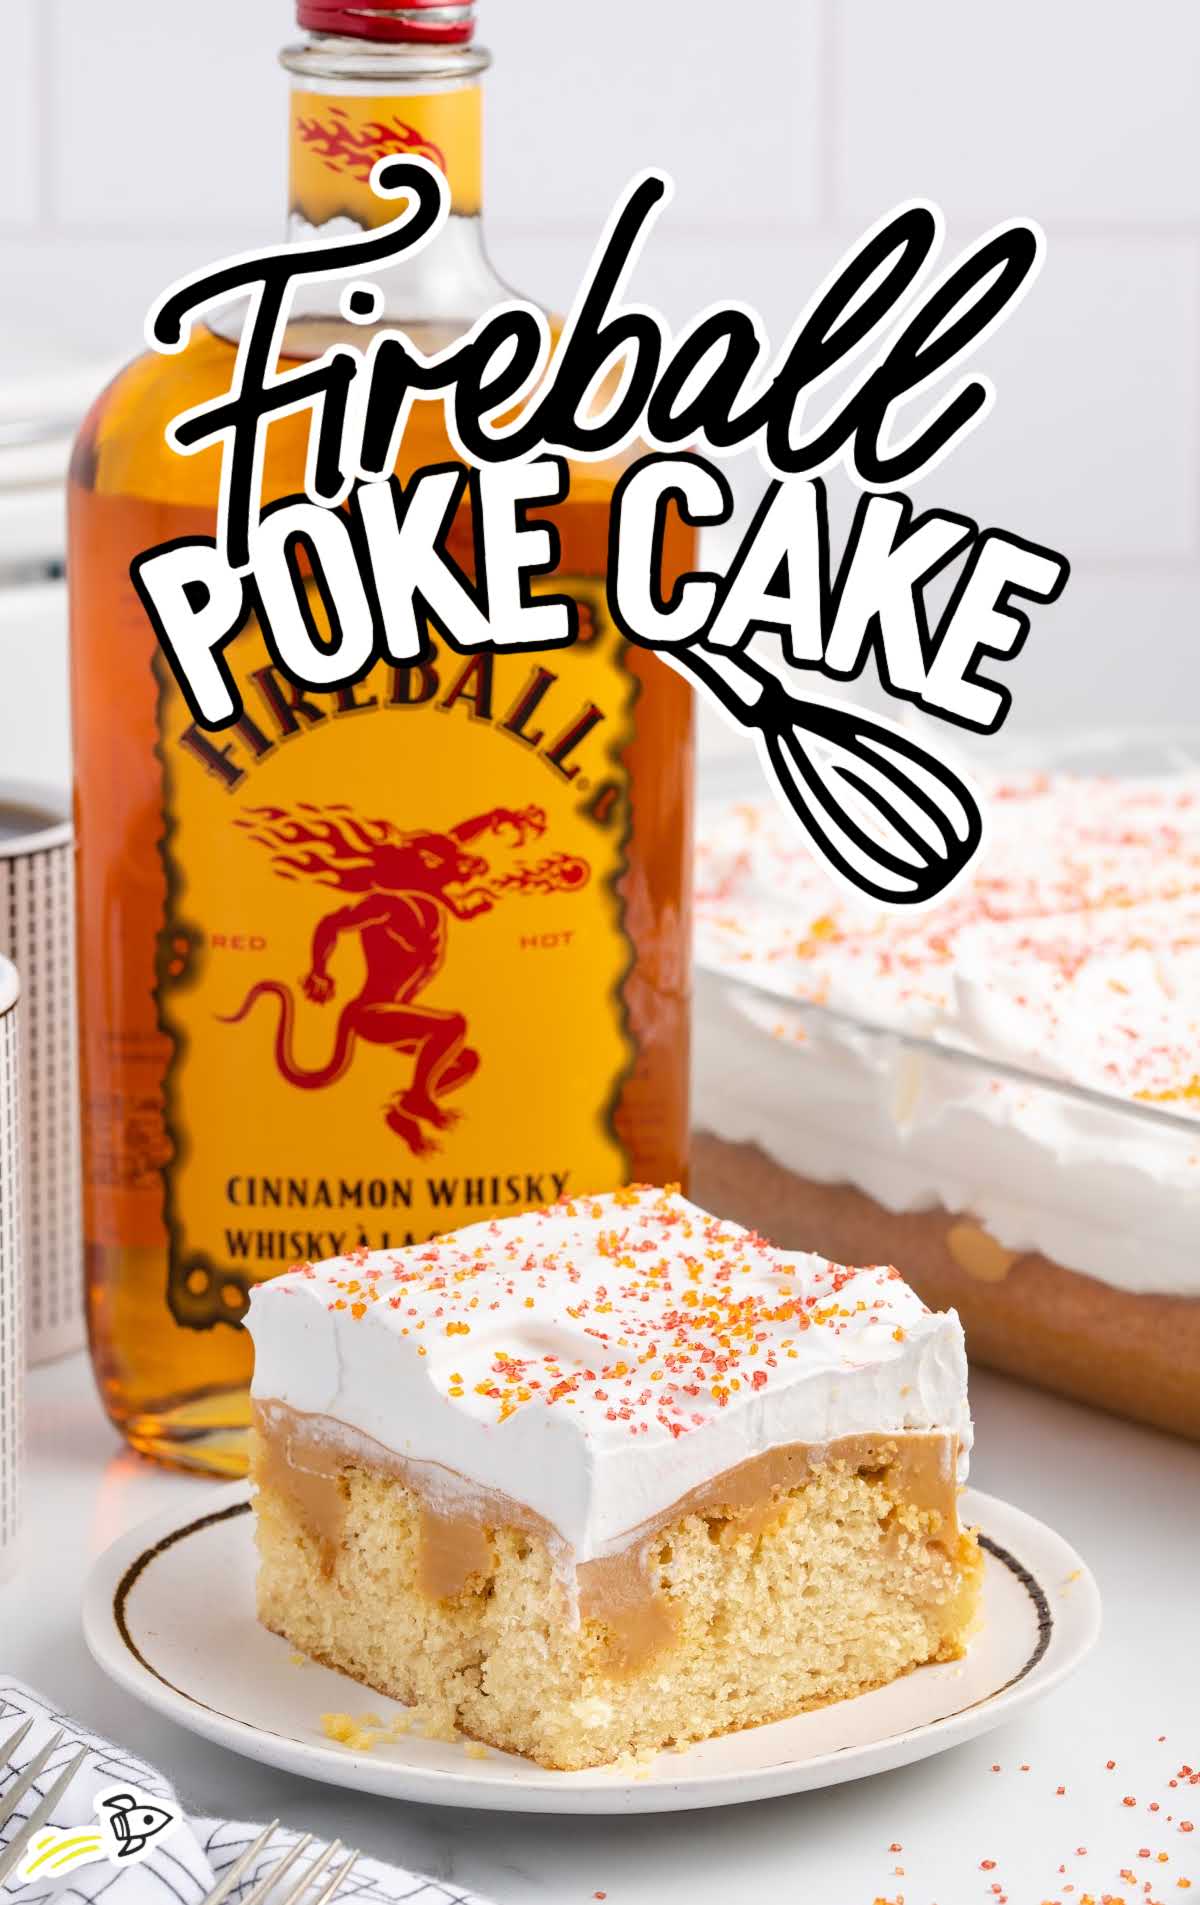 close up shot of a cake on a plate with a fireball bottle in the background